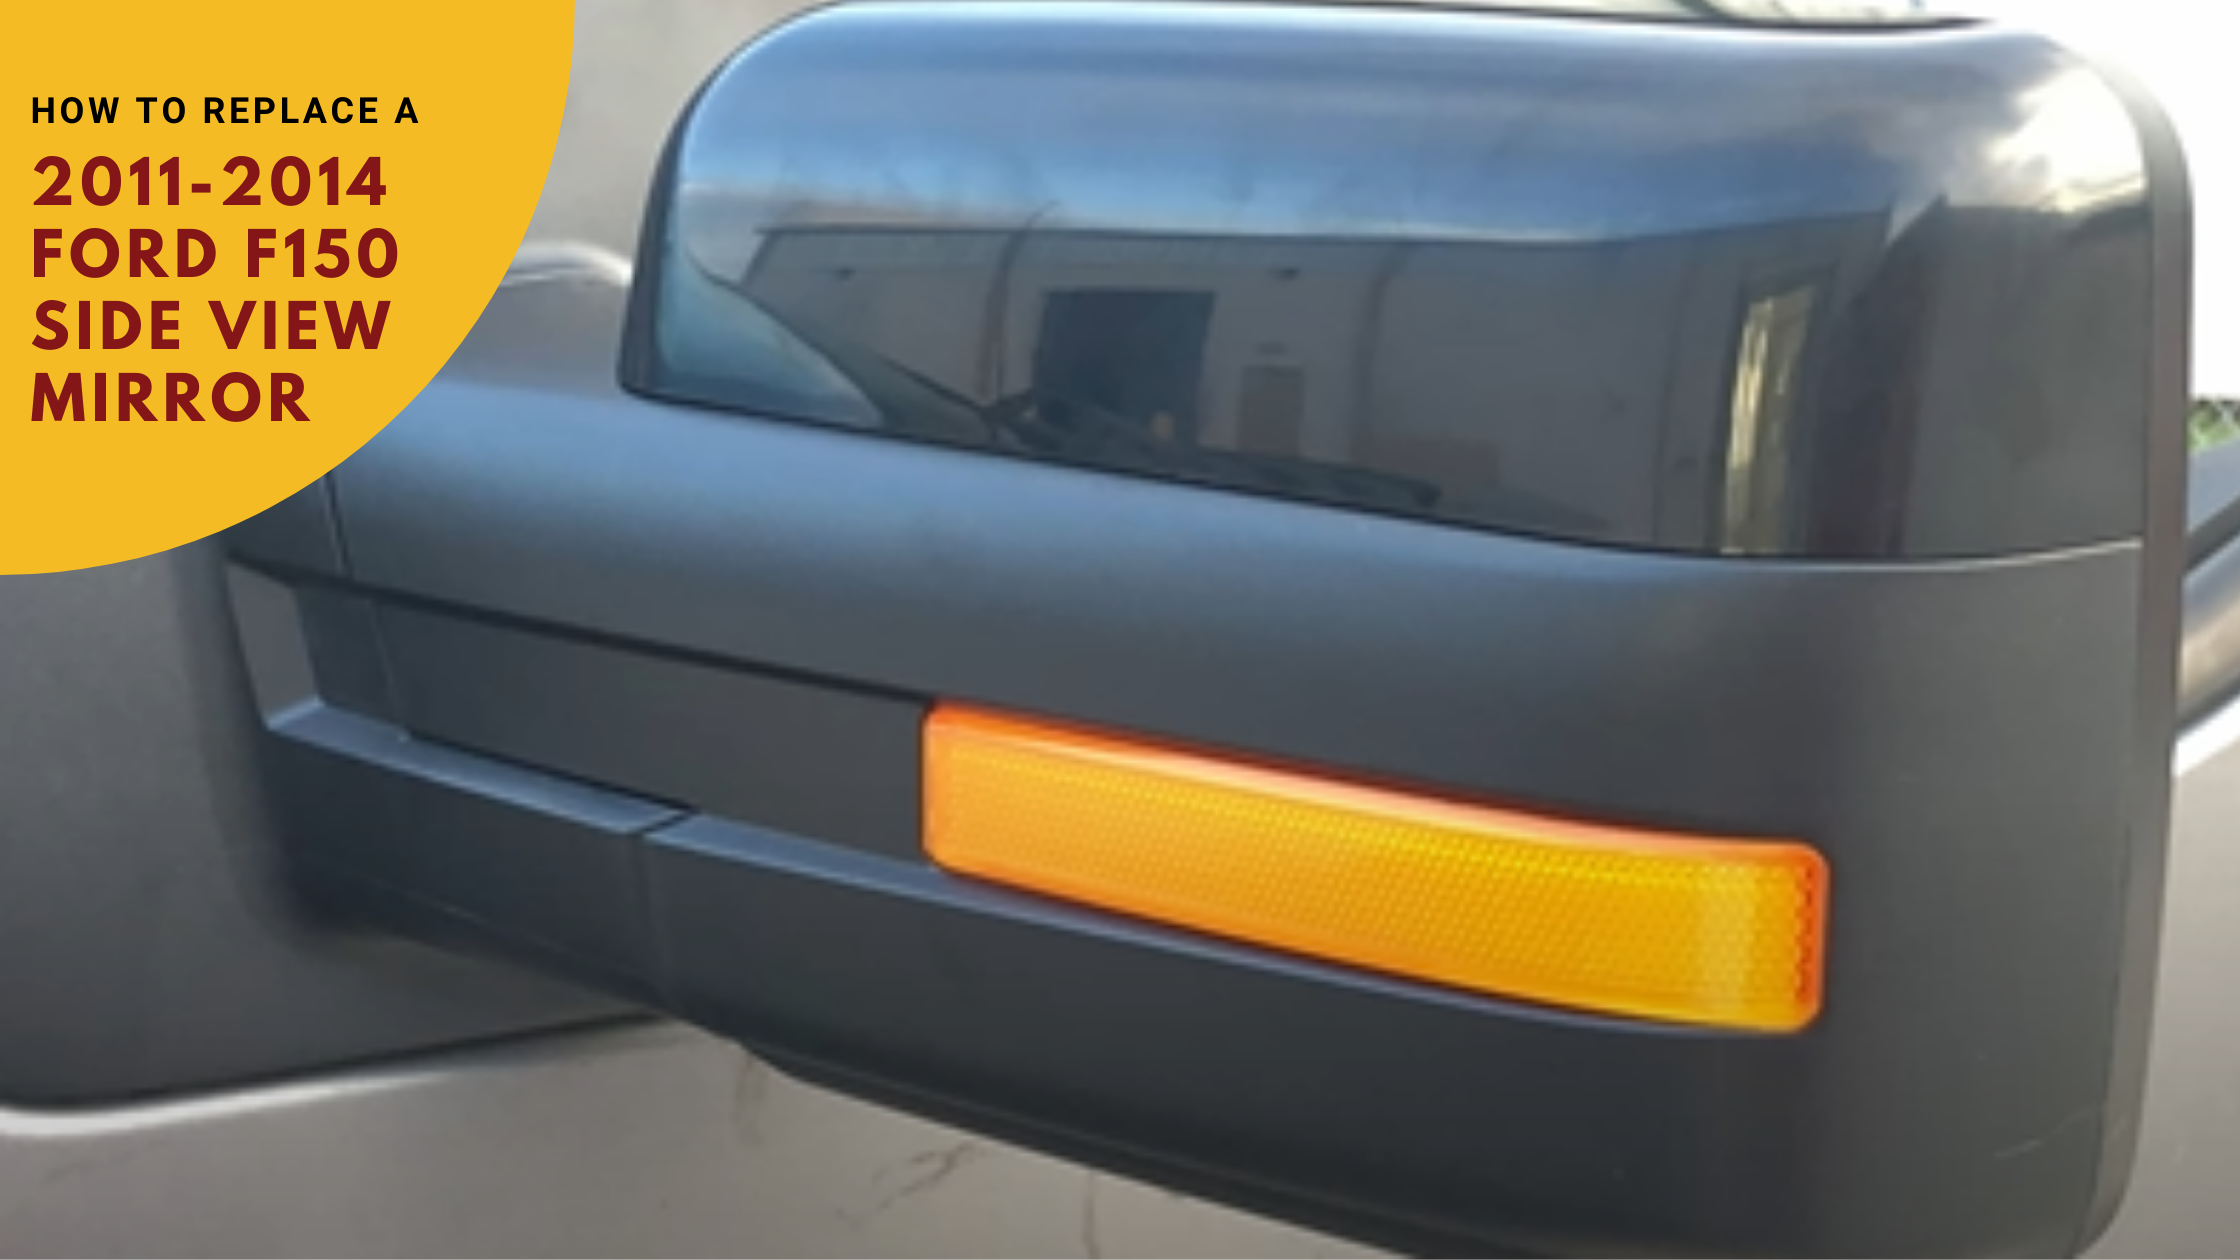 2011-2014 Ford F-150 Side View Mirror Replacement